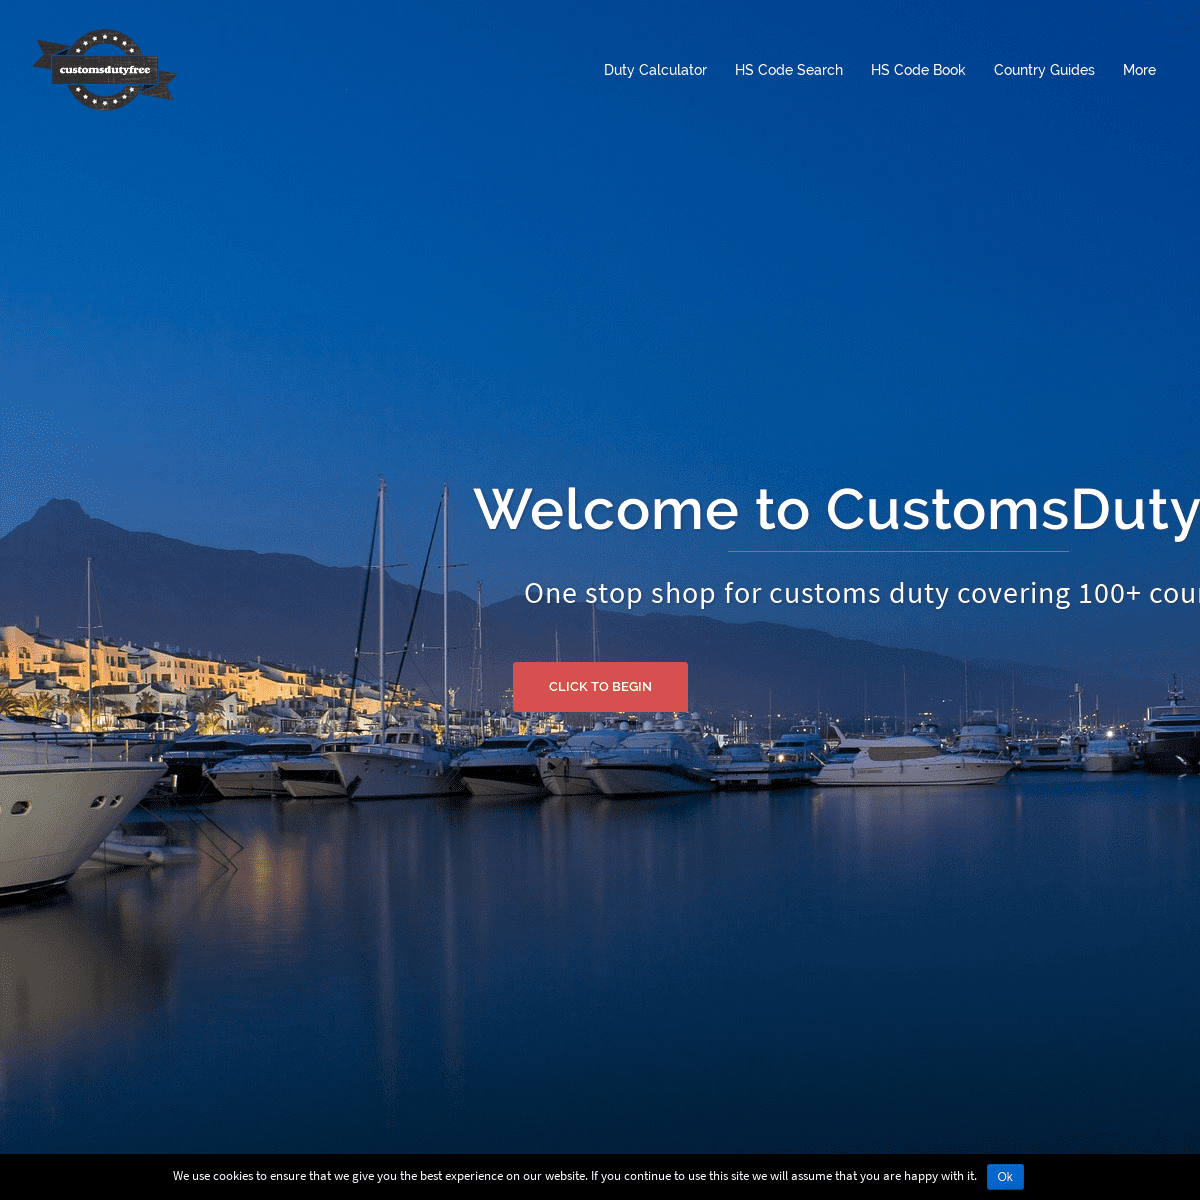 Calculate customs duty/import duty and search hs codes for free - CustomsDutyFree